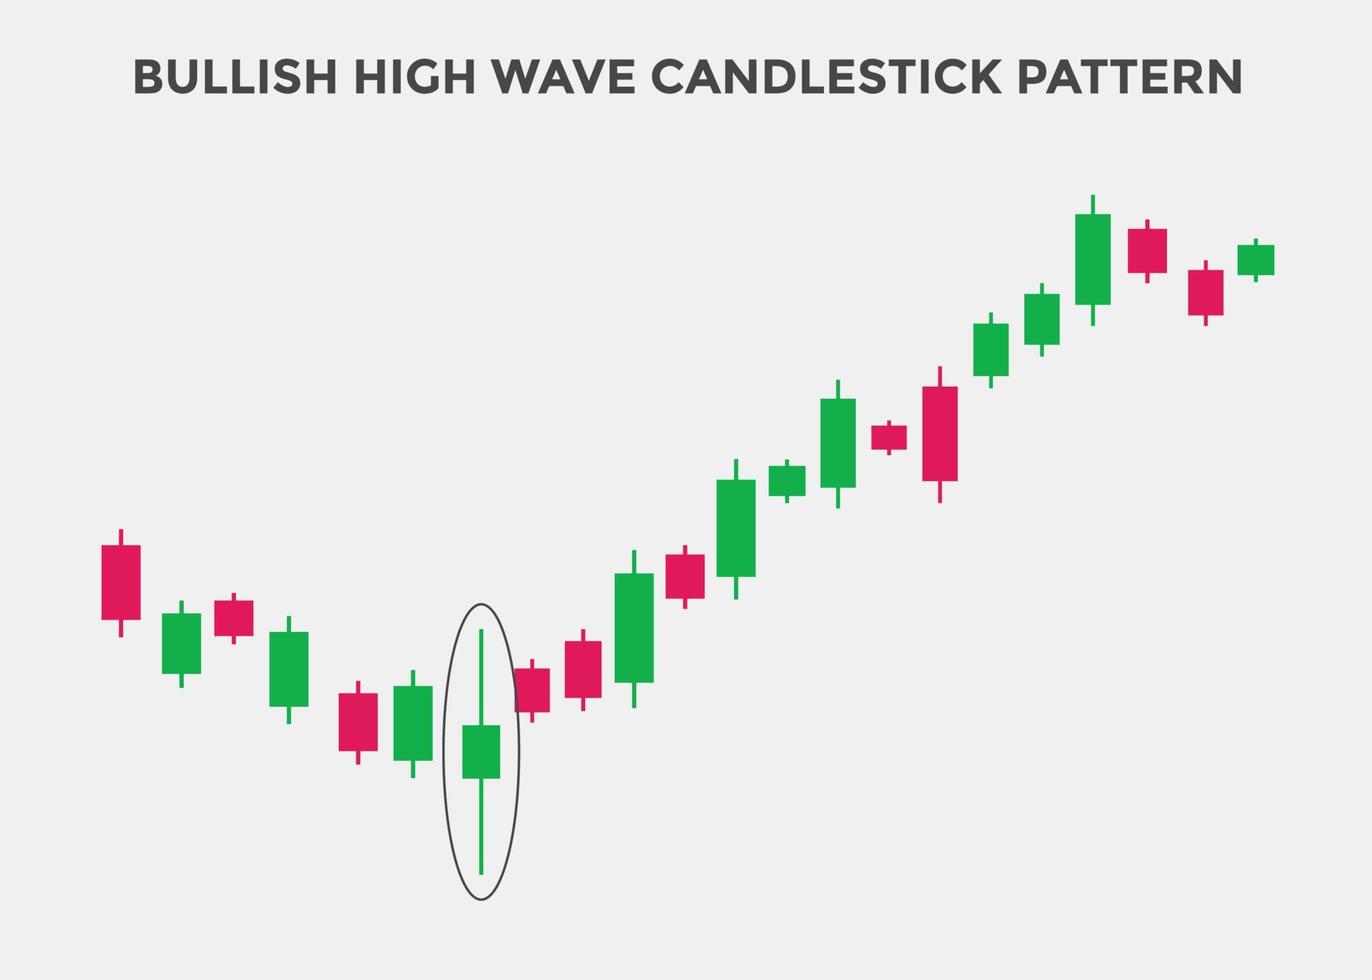 Bullish high wave candlestick chart. Candlestick chart Pattern For Traders. Powerful Bullish Candlestick chart for forex, stock, cryptocurrency. Japanese candlesticks pattern. vector